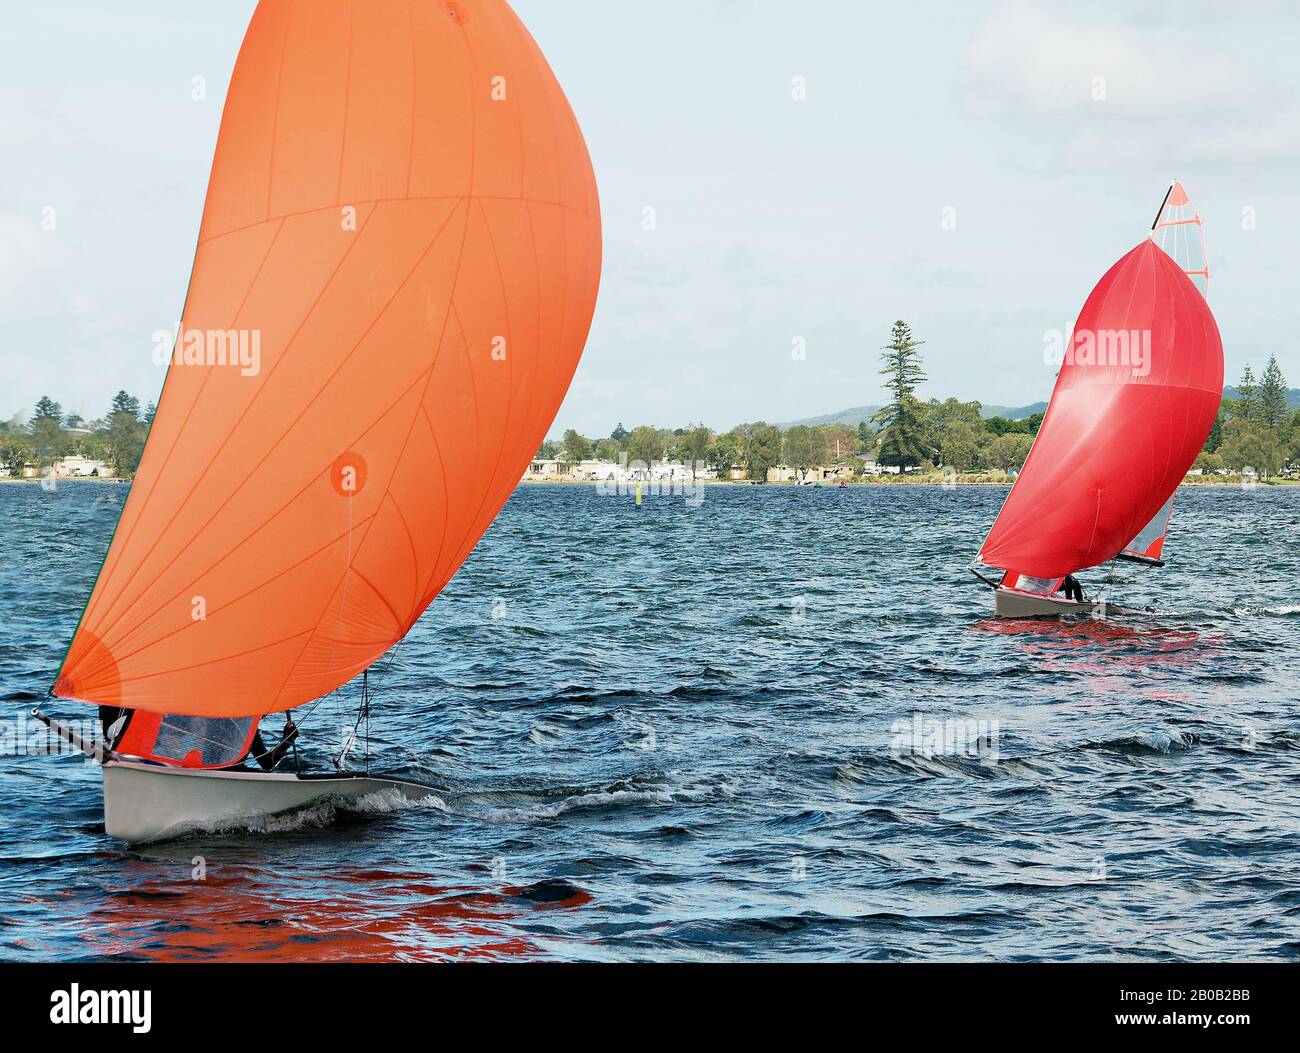 Children sailing in small colourful boats and dinghies for fun and in competition. Teamwork by junior sailors racing on saltwater Lake Macquarie. Phot Stock Photo